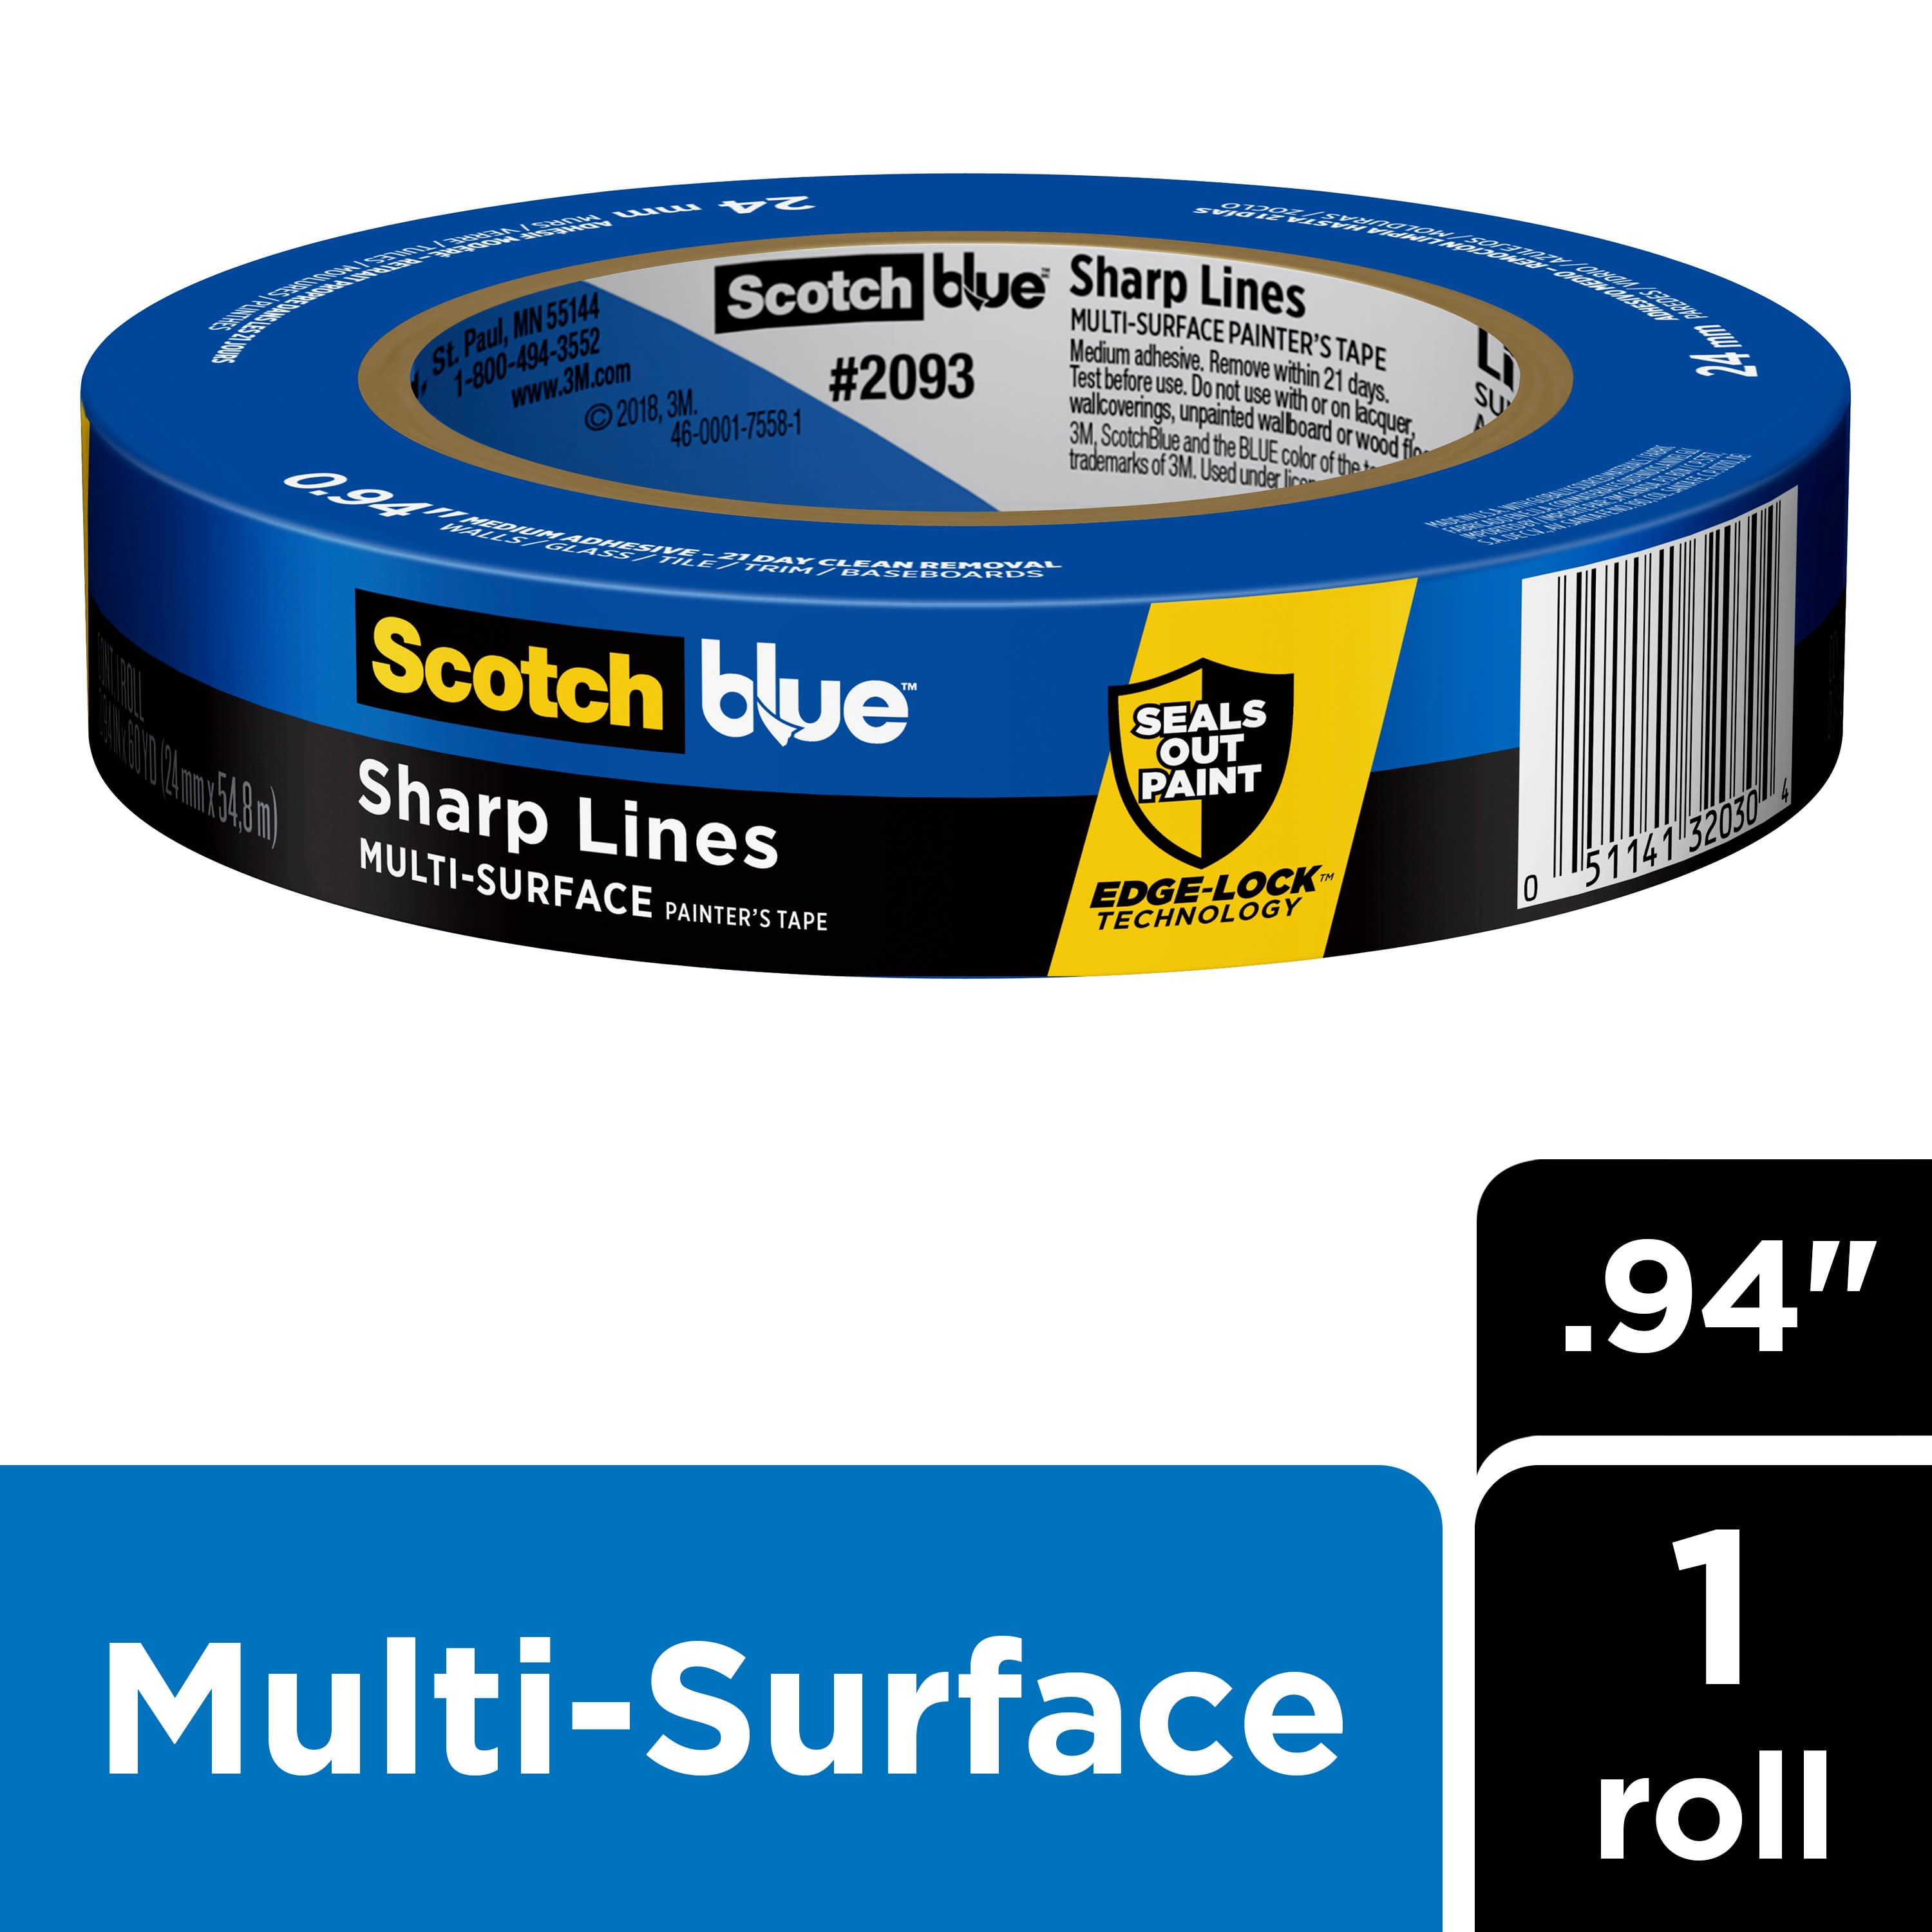 3M Scotch Artist Tape For Curves